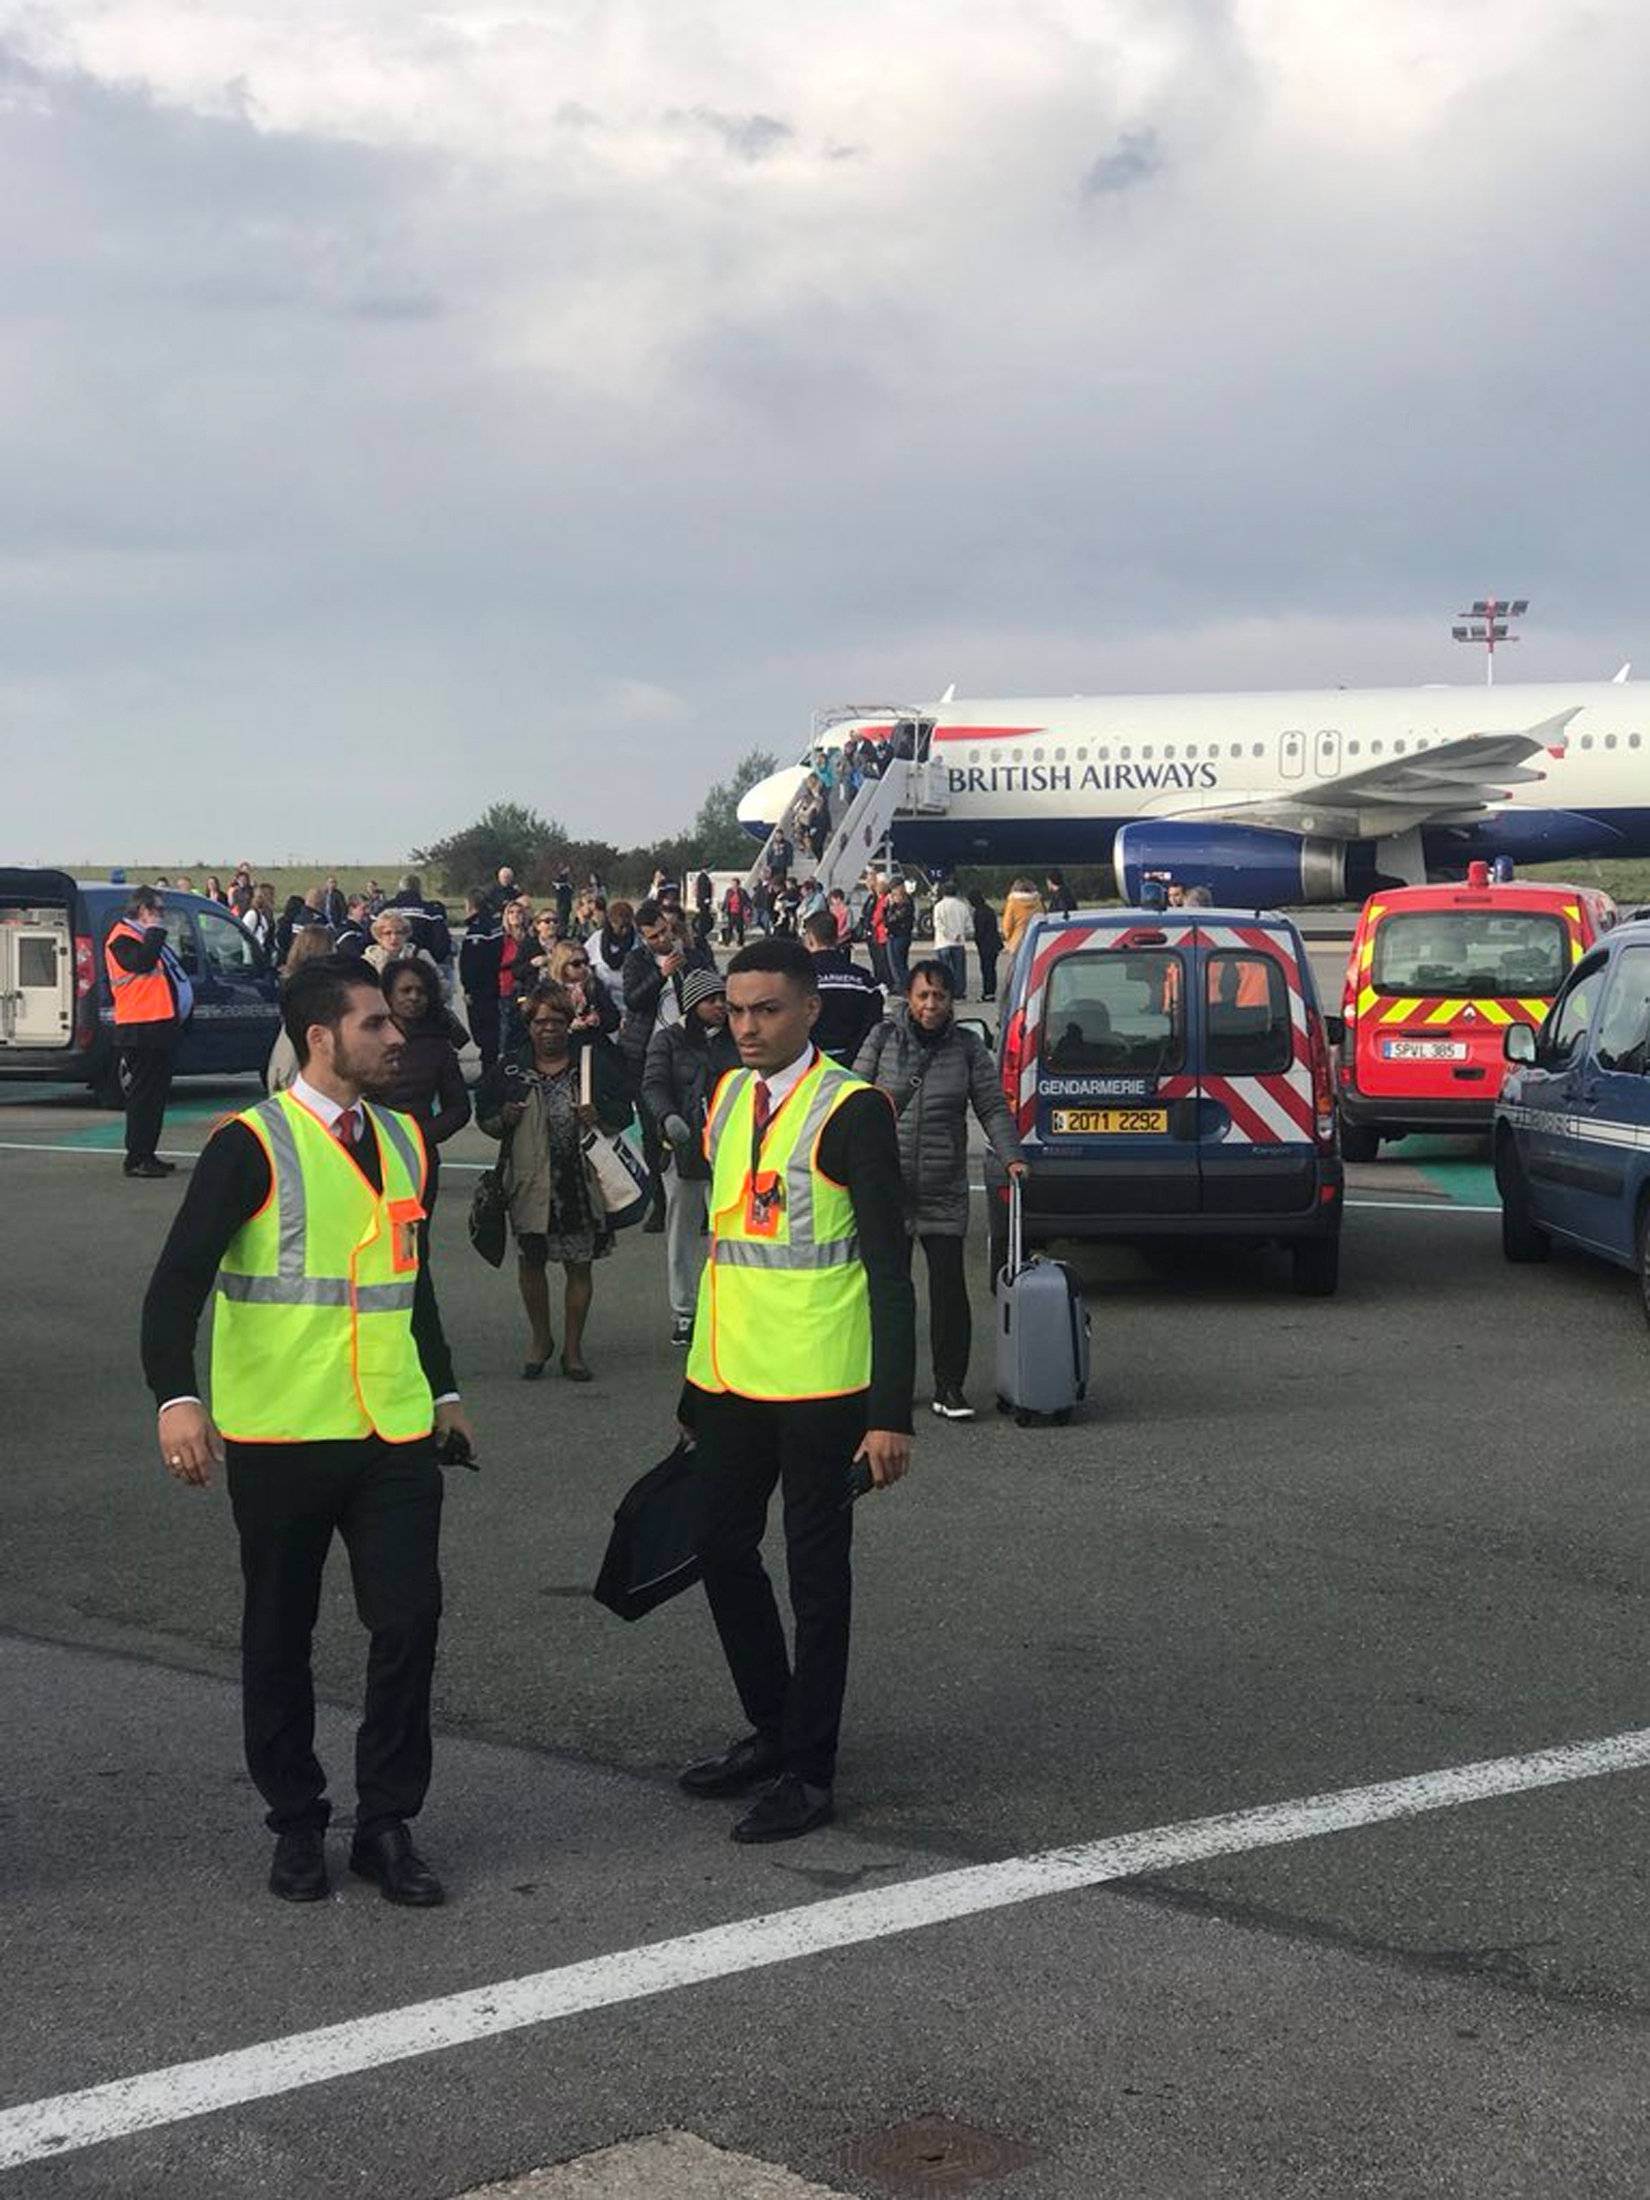 A view of an evacuation of a British Airways airplane at Charles de Gaulle airport in Paris